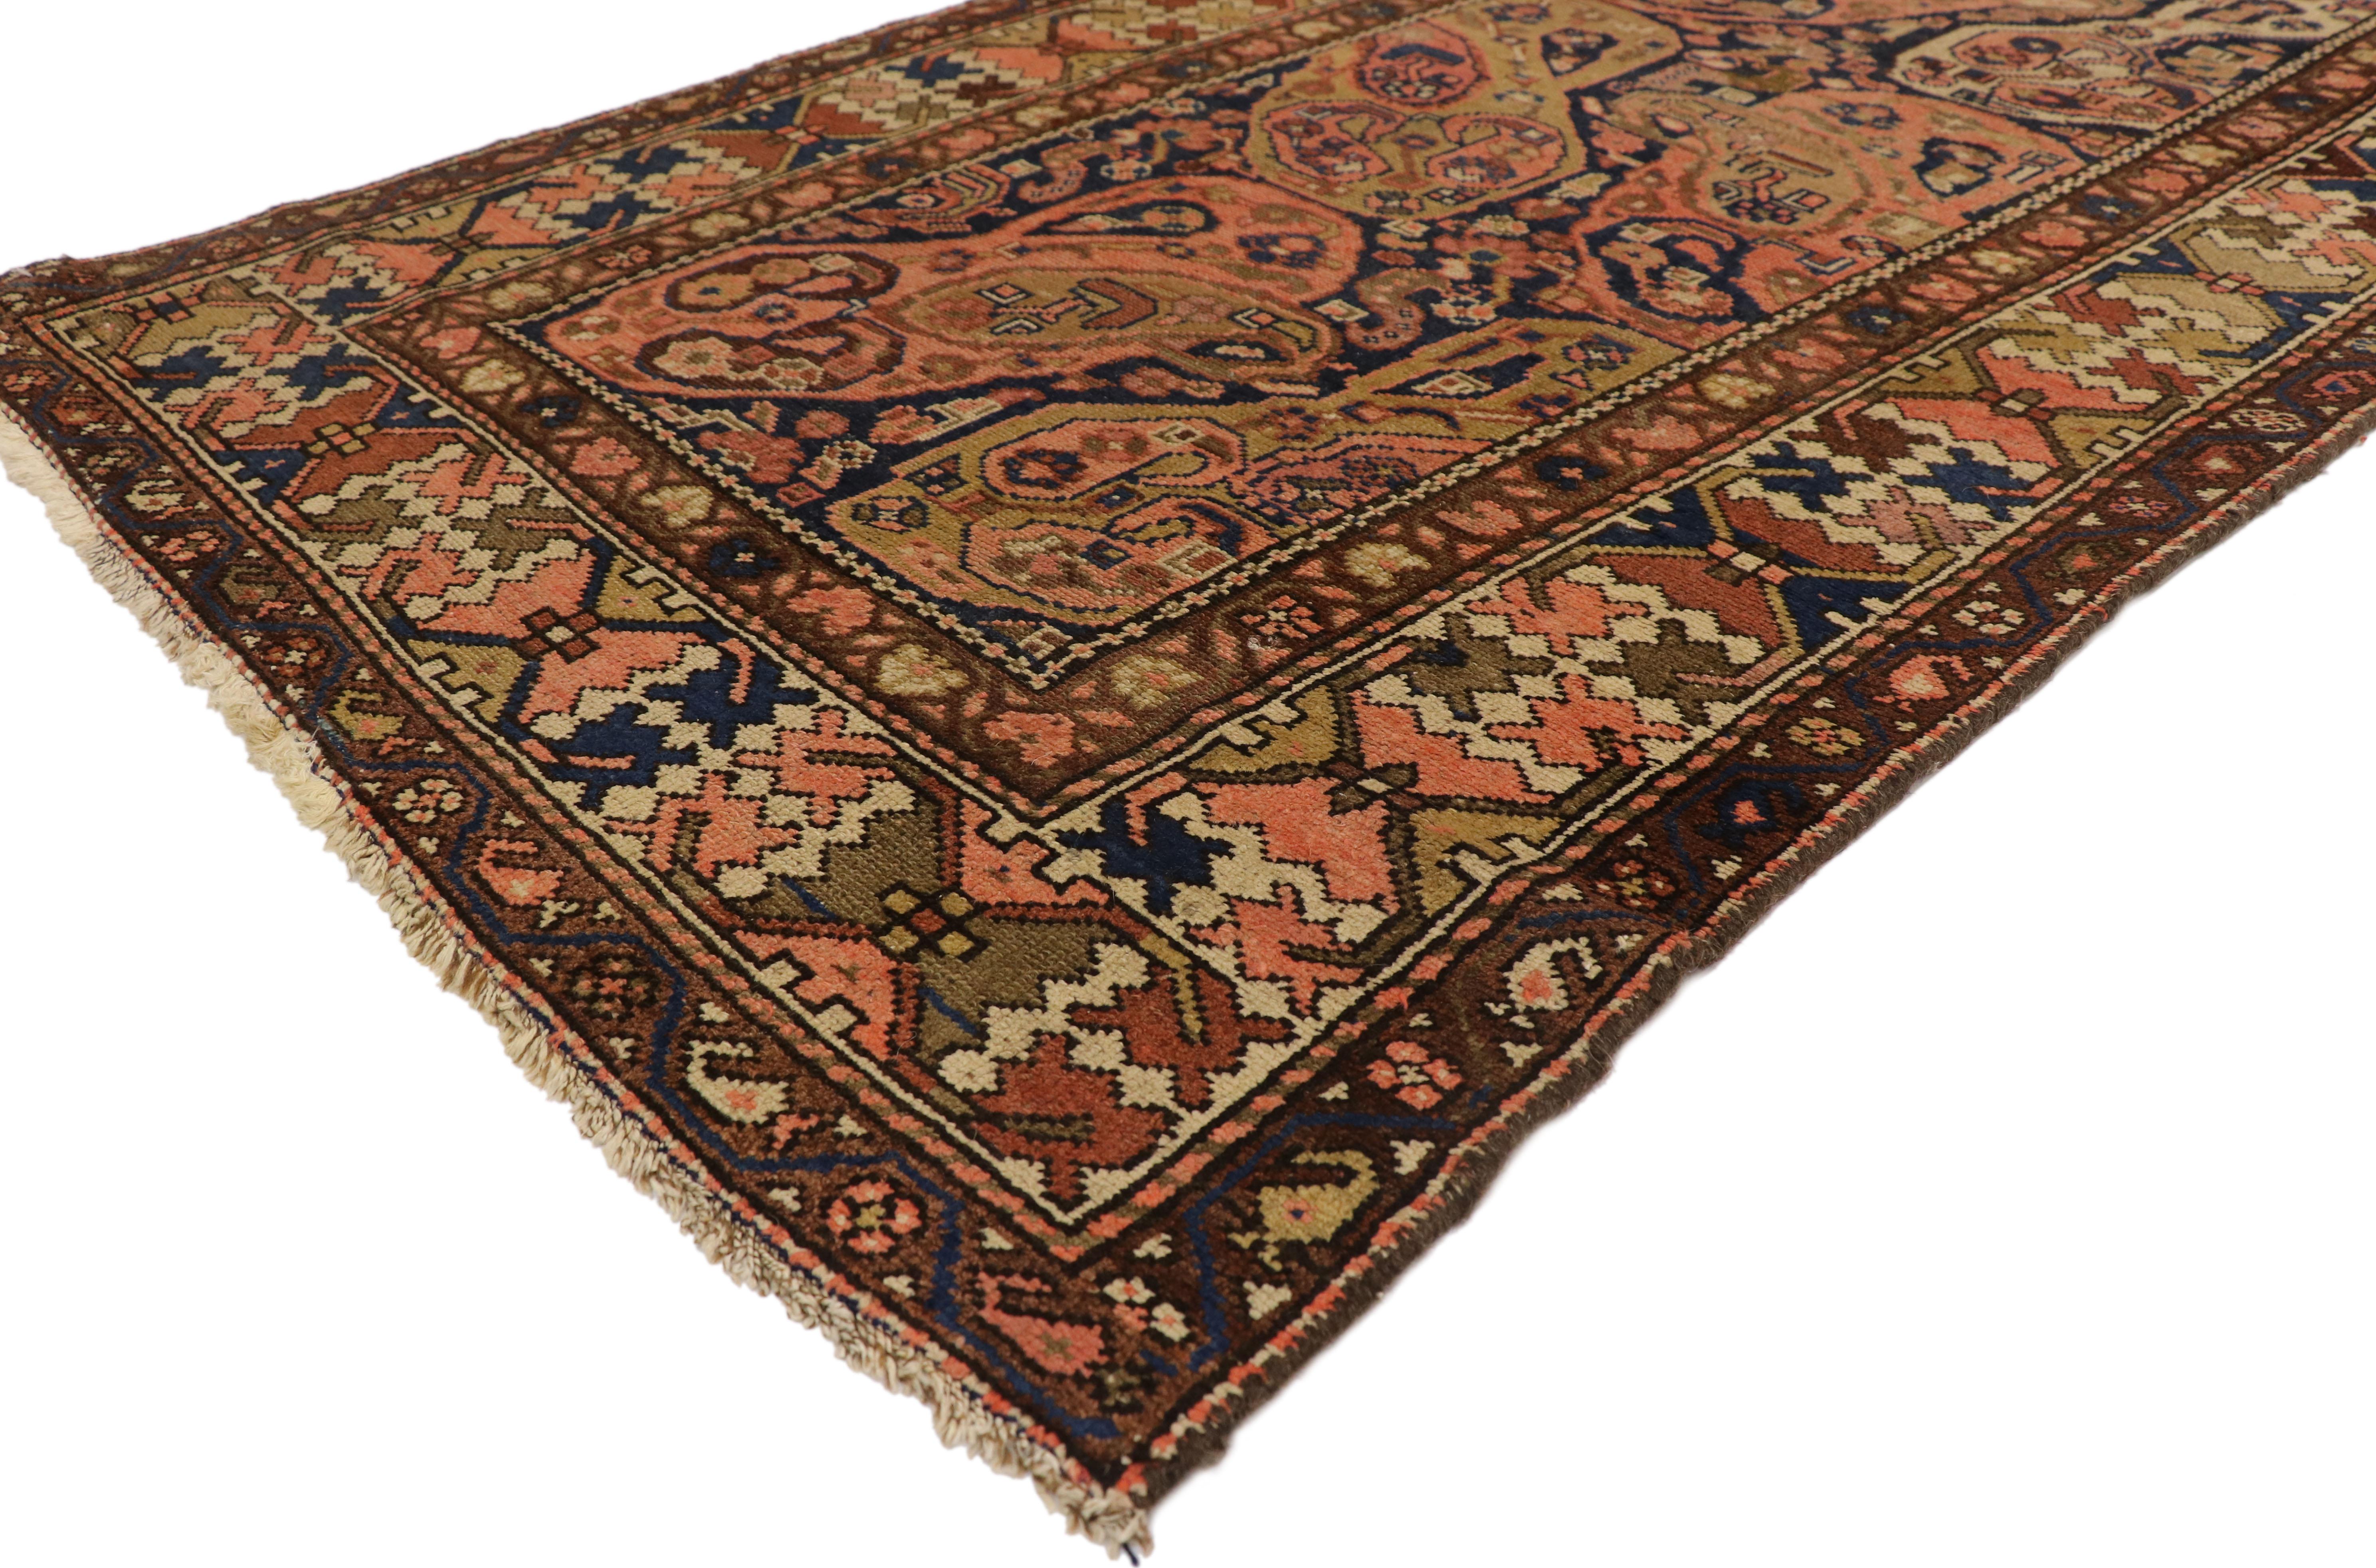 72803, antique Persian Malayer runner with Boteh design, extra-long hallway runner. With a dazzling polychromatic color palette and impressive boteh design, this antique Persian Malayer runner would bring a sense of vivacity and sophistication to